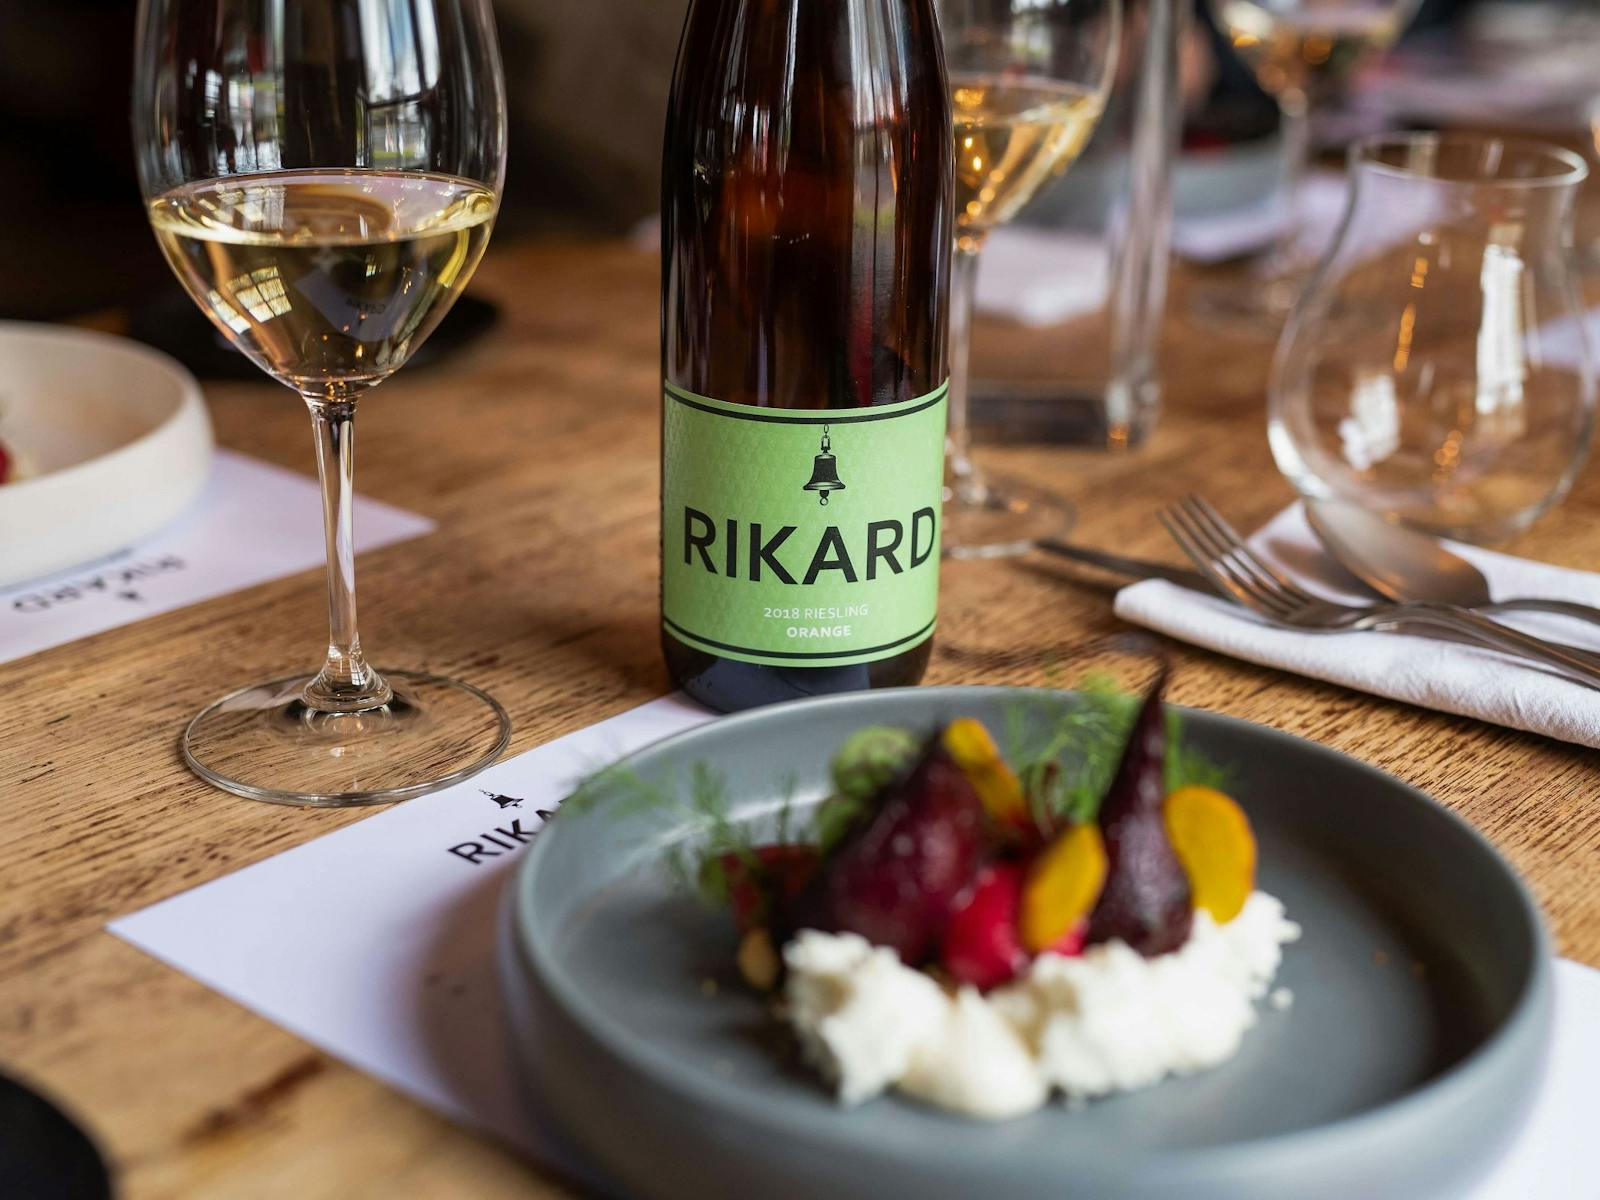 Image for RIKARD Wines at Charred